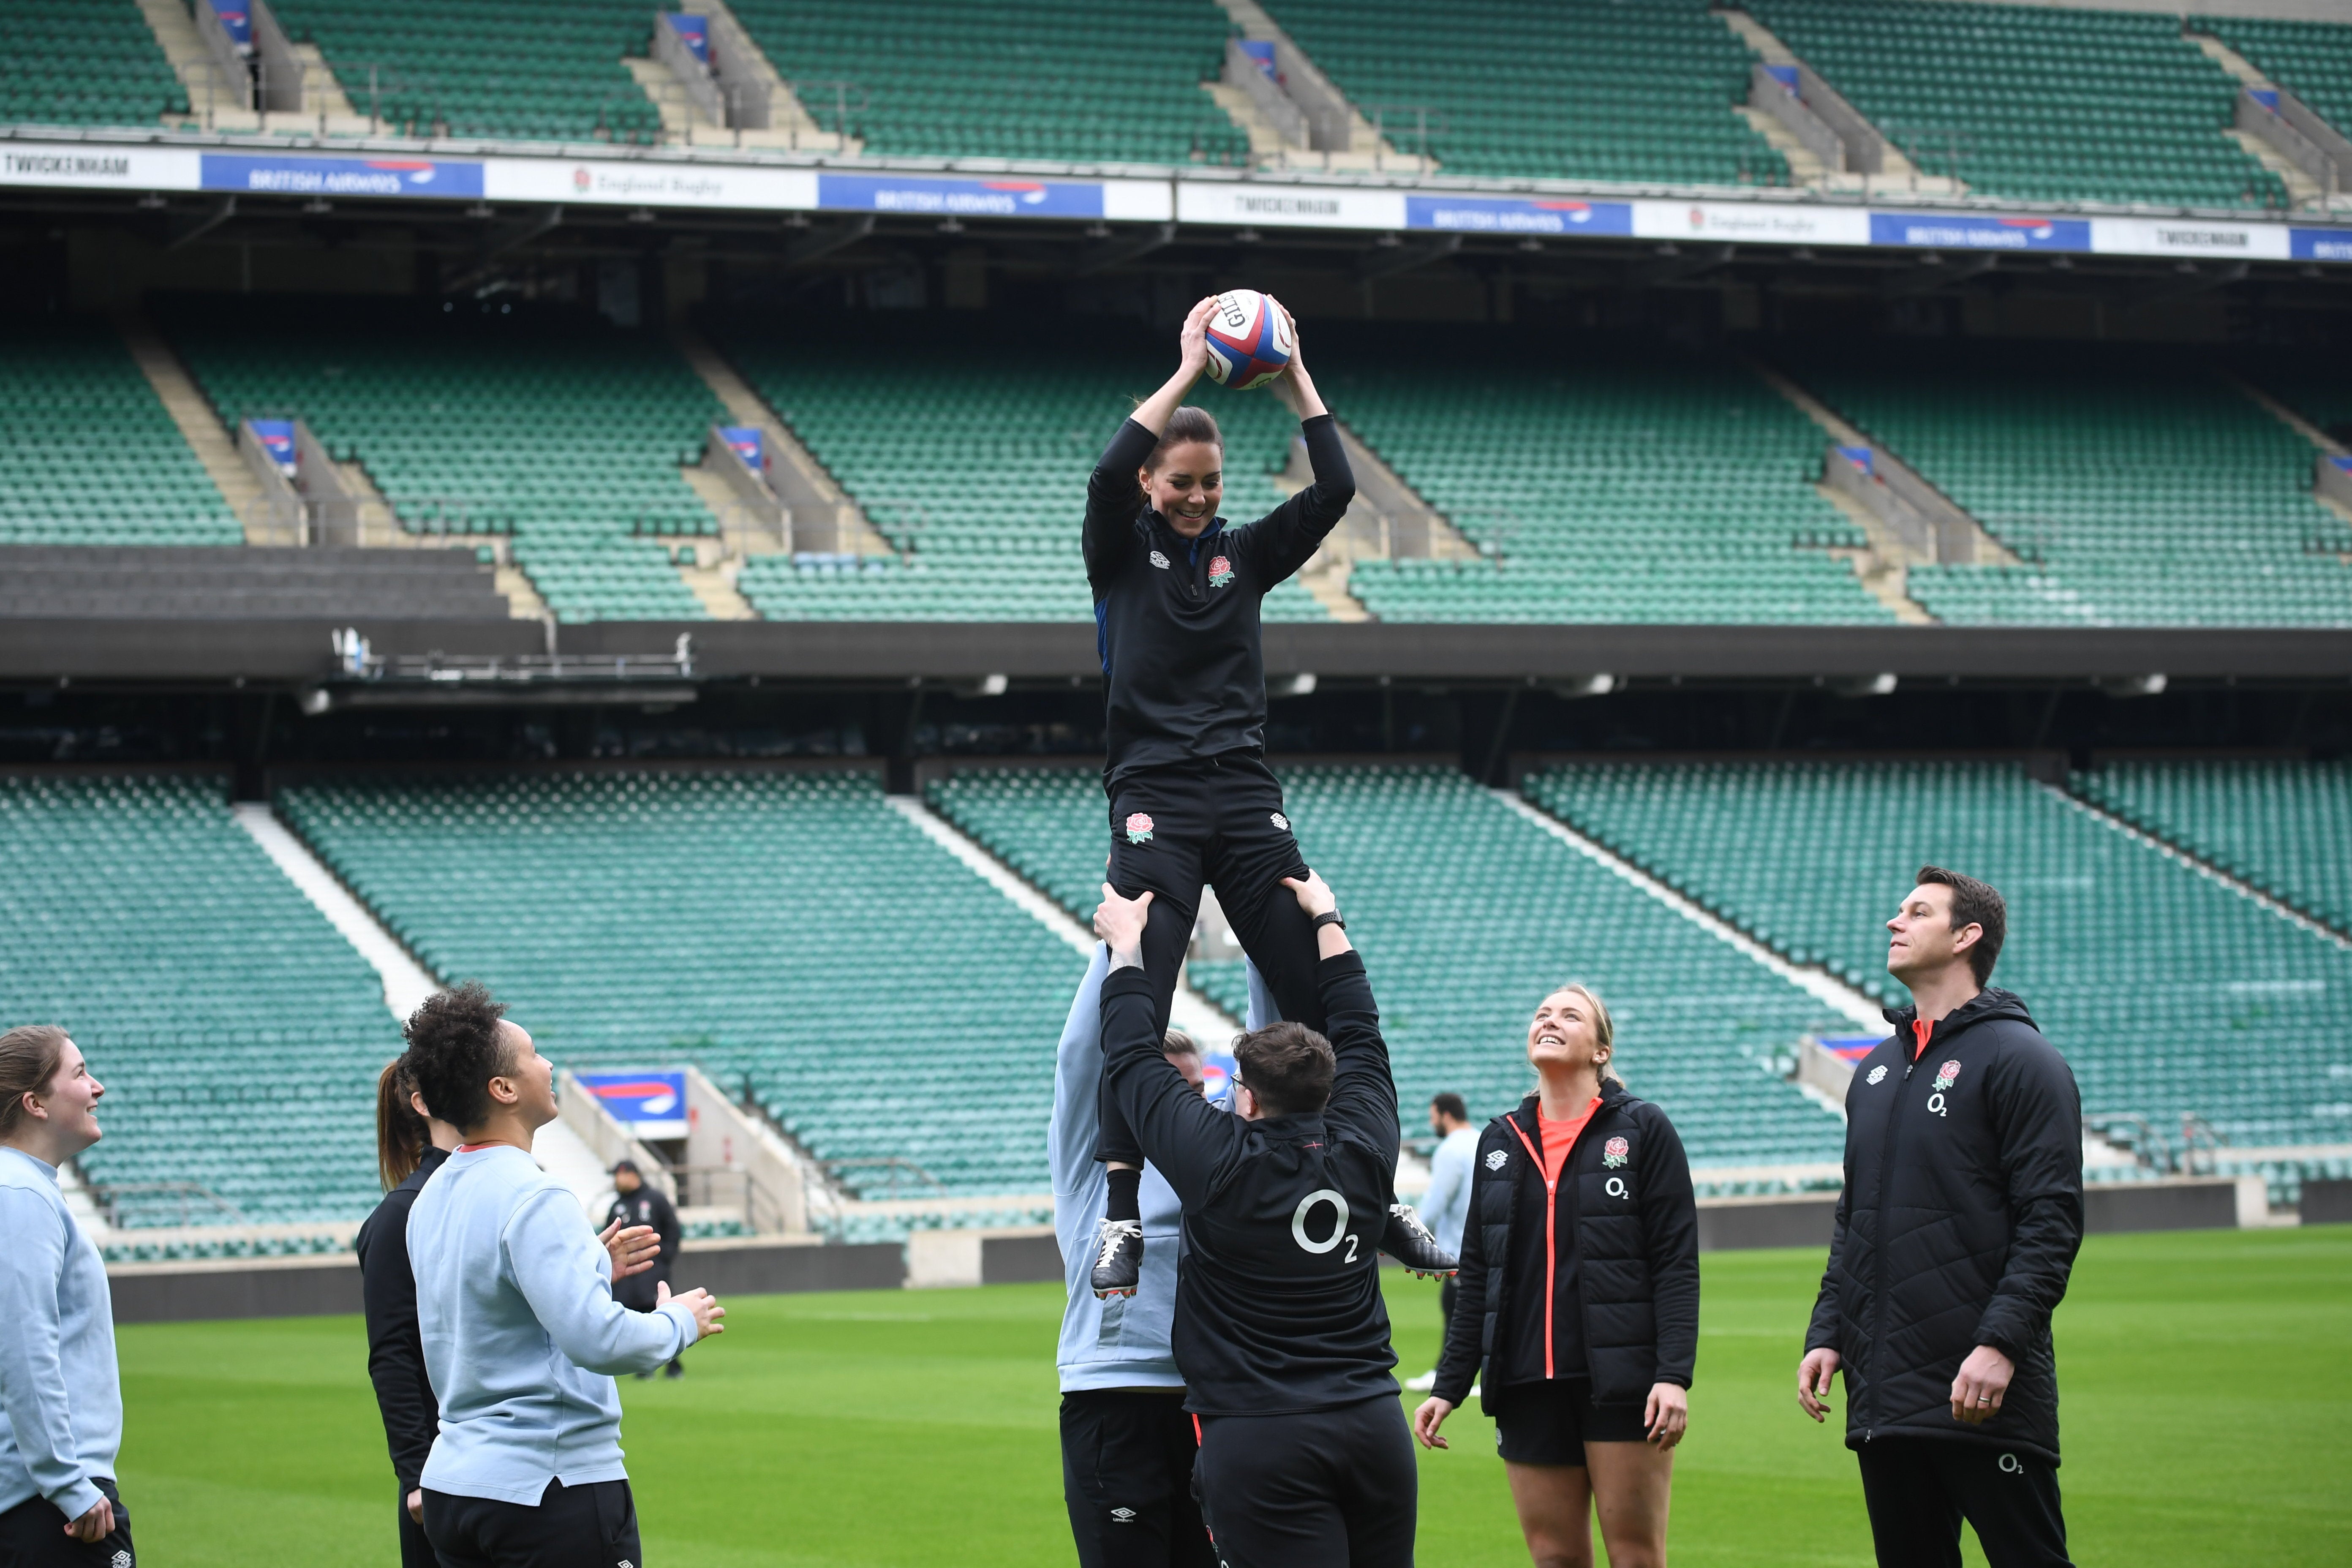 The Duchess of Cambridge is lifted up in a lineout as she plays rugby (Jeremy Selwyn/Evening Standard/PA)